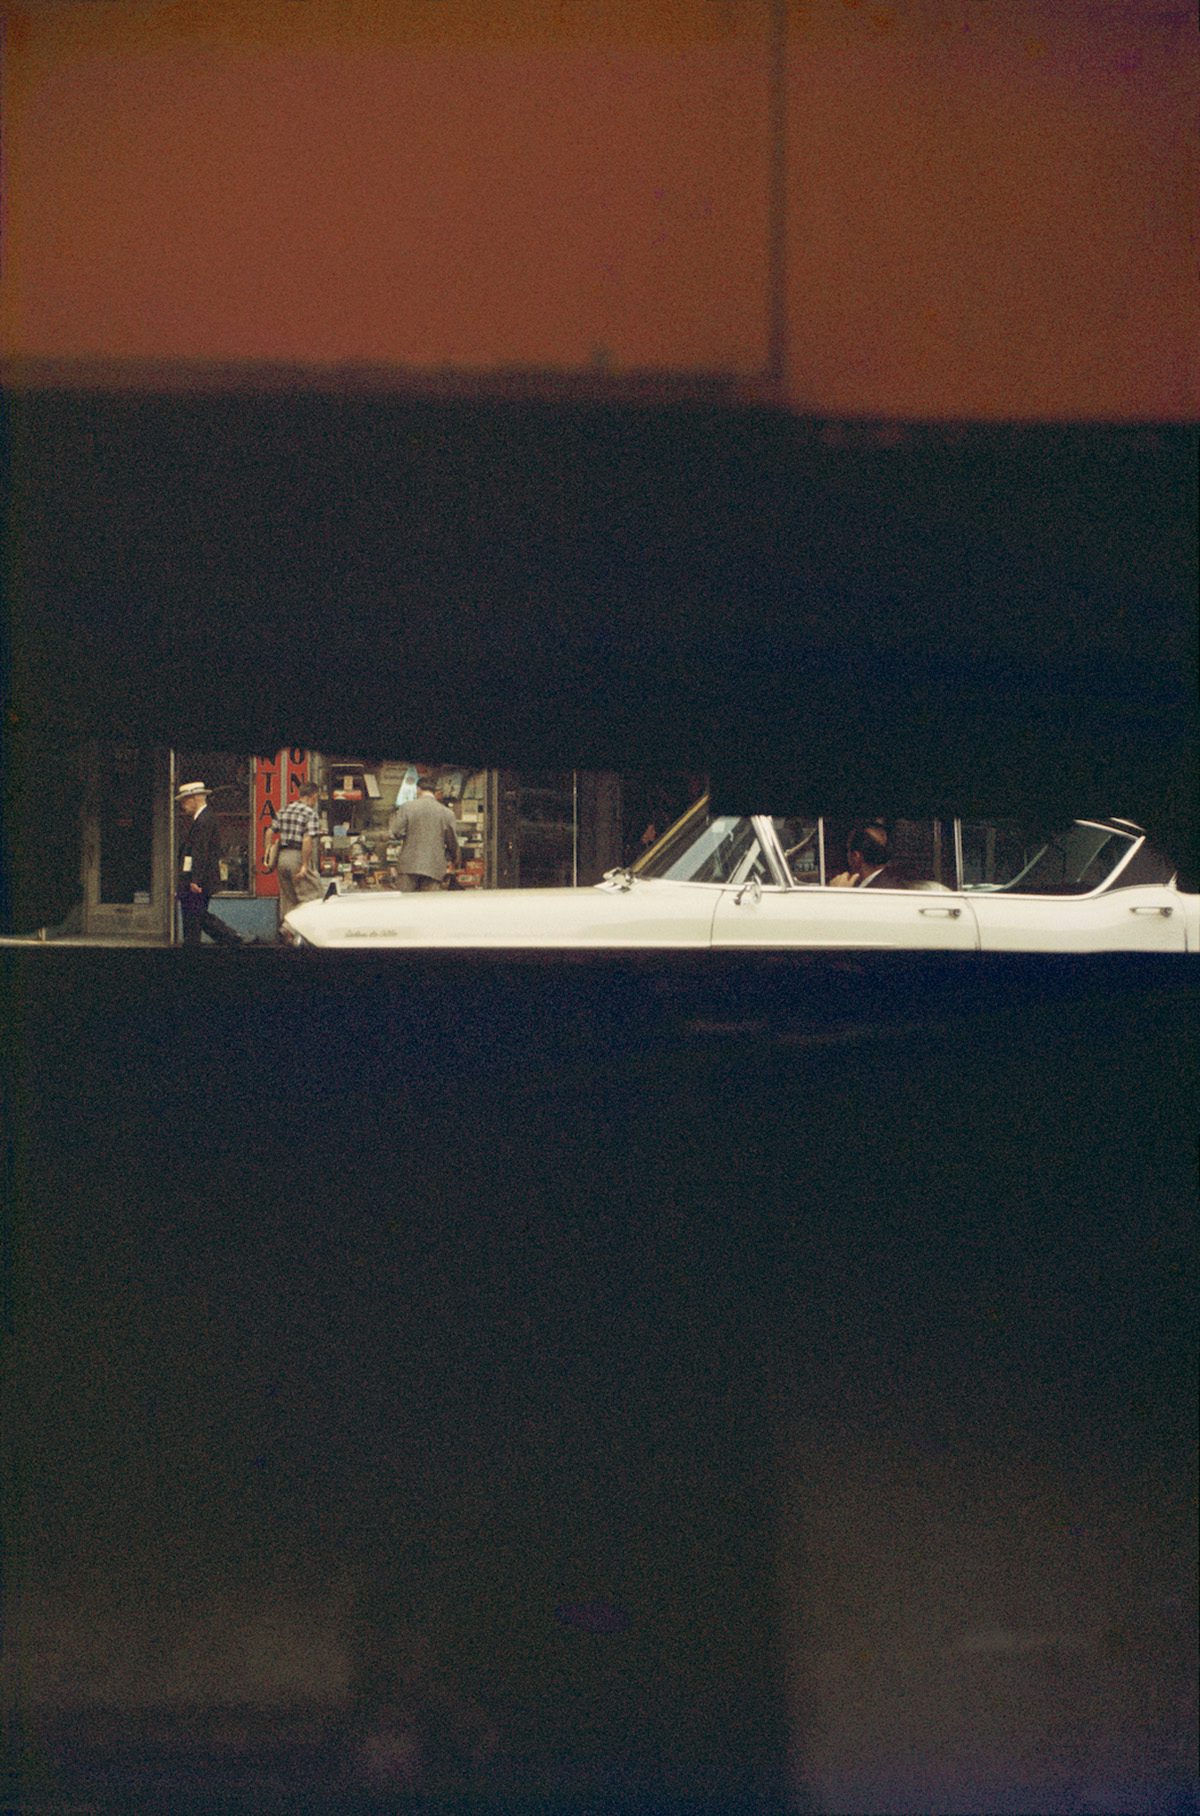 Photograph by Saul Leiter showing a sliver of a city street visible through a horizontal gap in a structure